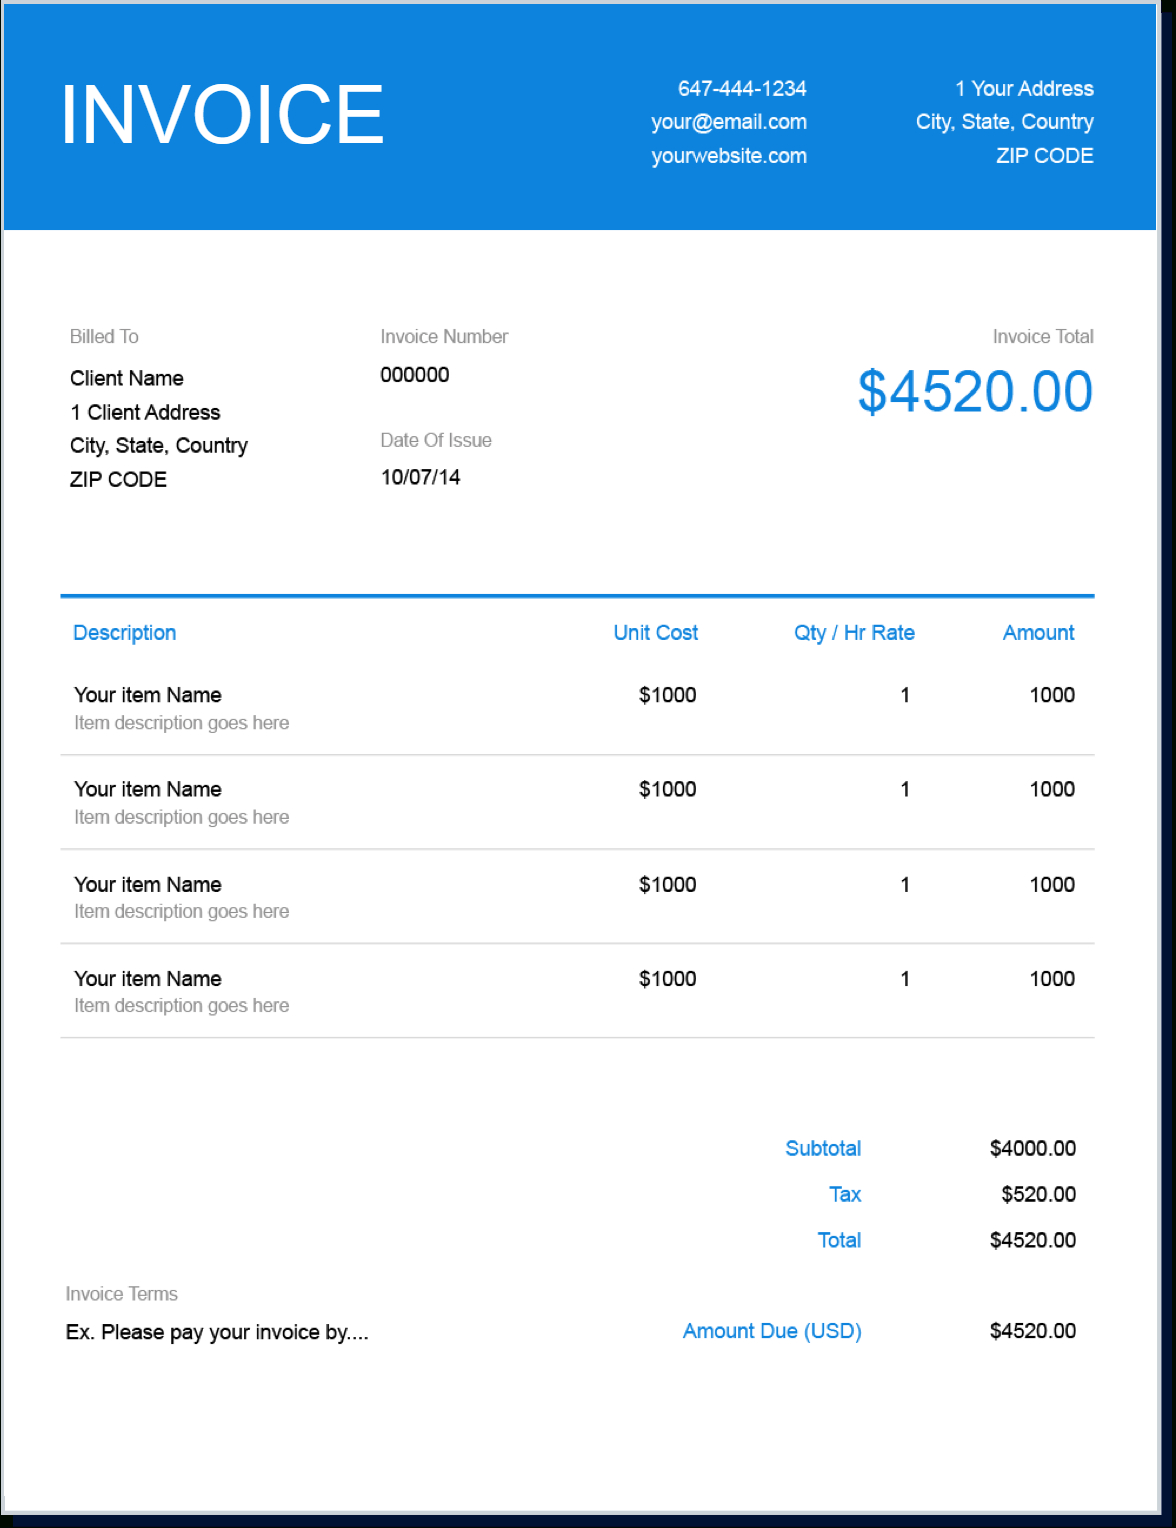 Invoice Template | Create And Send Free Invoices Instantly Pertaining To Web Design Invoice Template Word